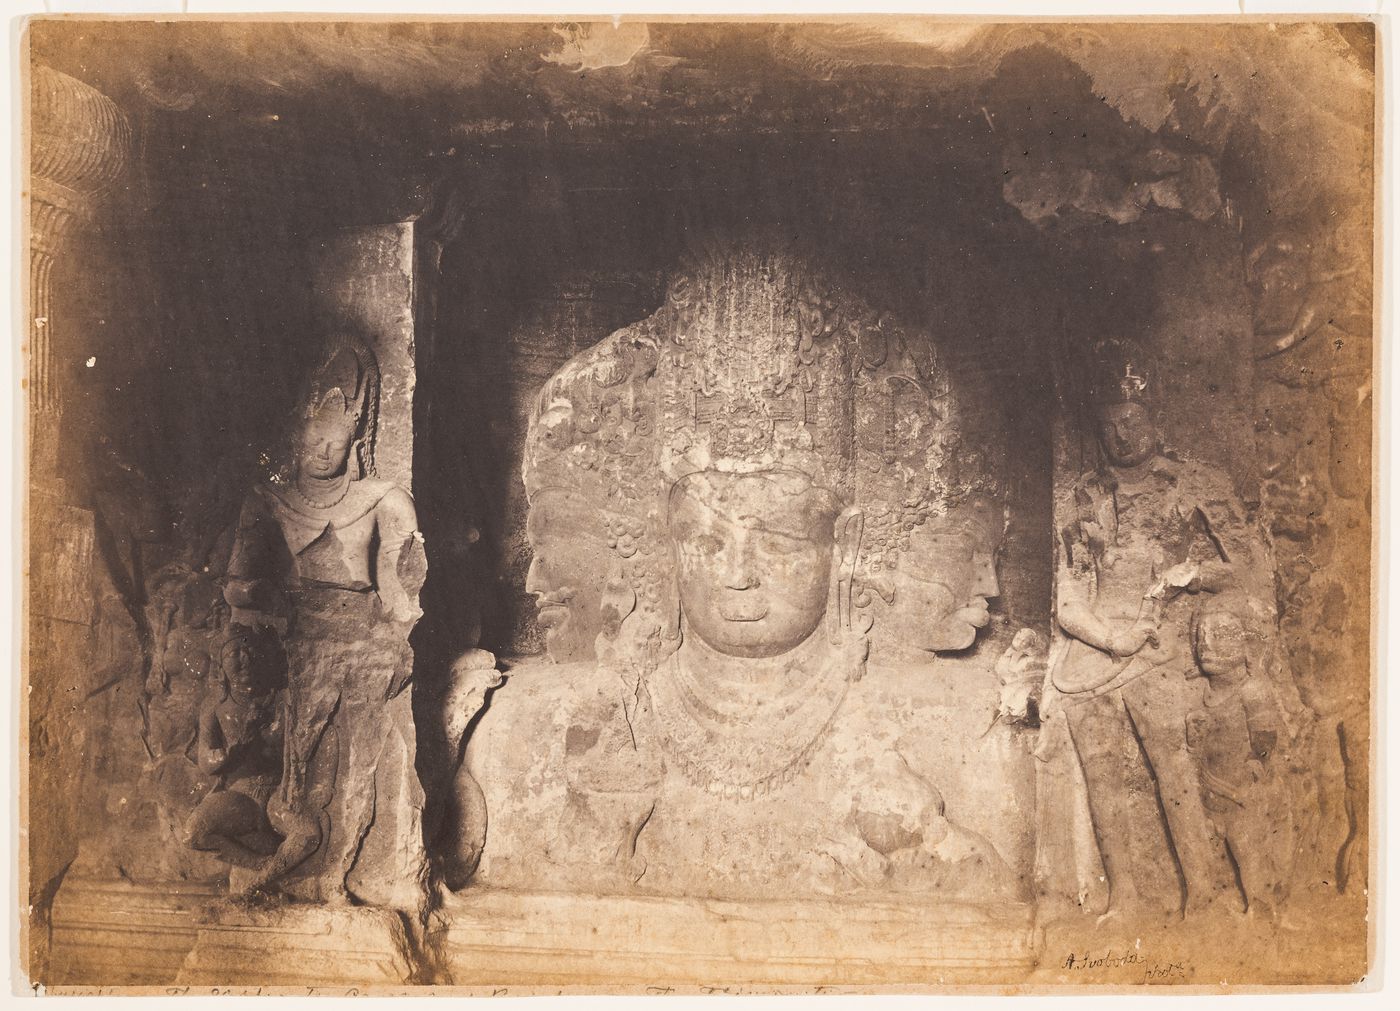 View of the triple-headed bust of Shiva (also known as the Mahesvara, the Mahesa-murti and the Sadashiva), Main Shrine, Cave No. 1 (also known as the Mahadeva Temple, the Shiva Cave and the Great Cave), Elephanta Caves, Elephanta Island, India